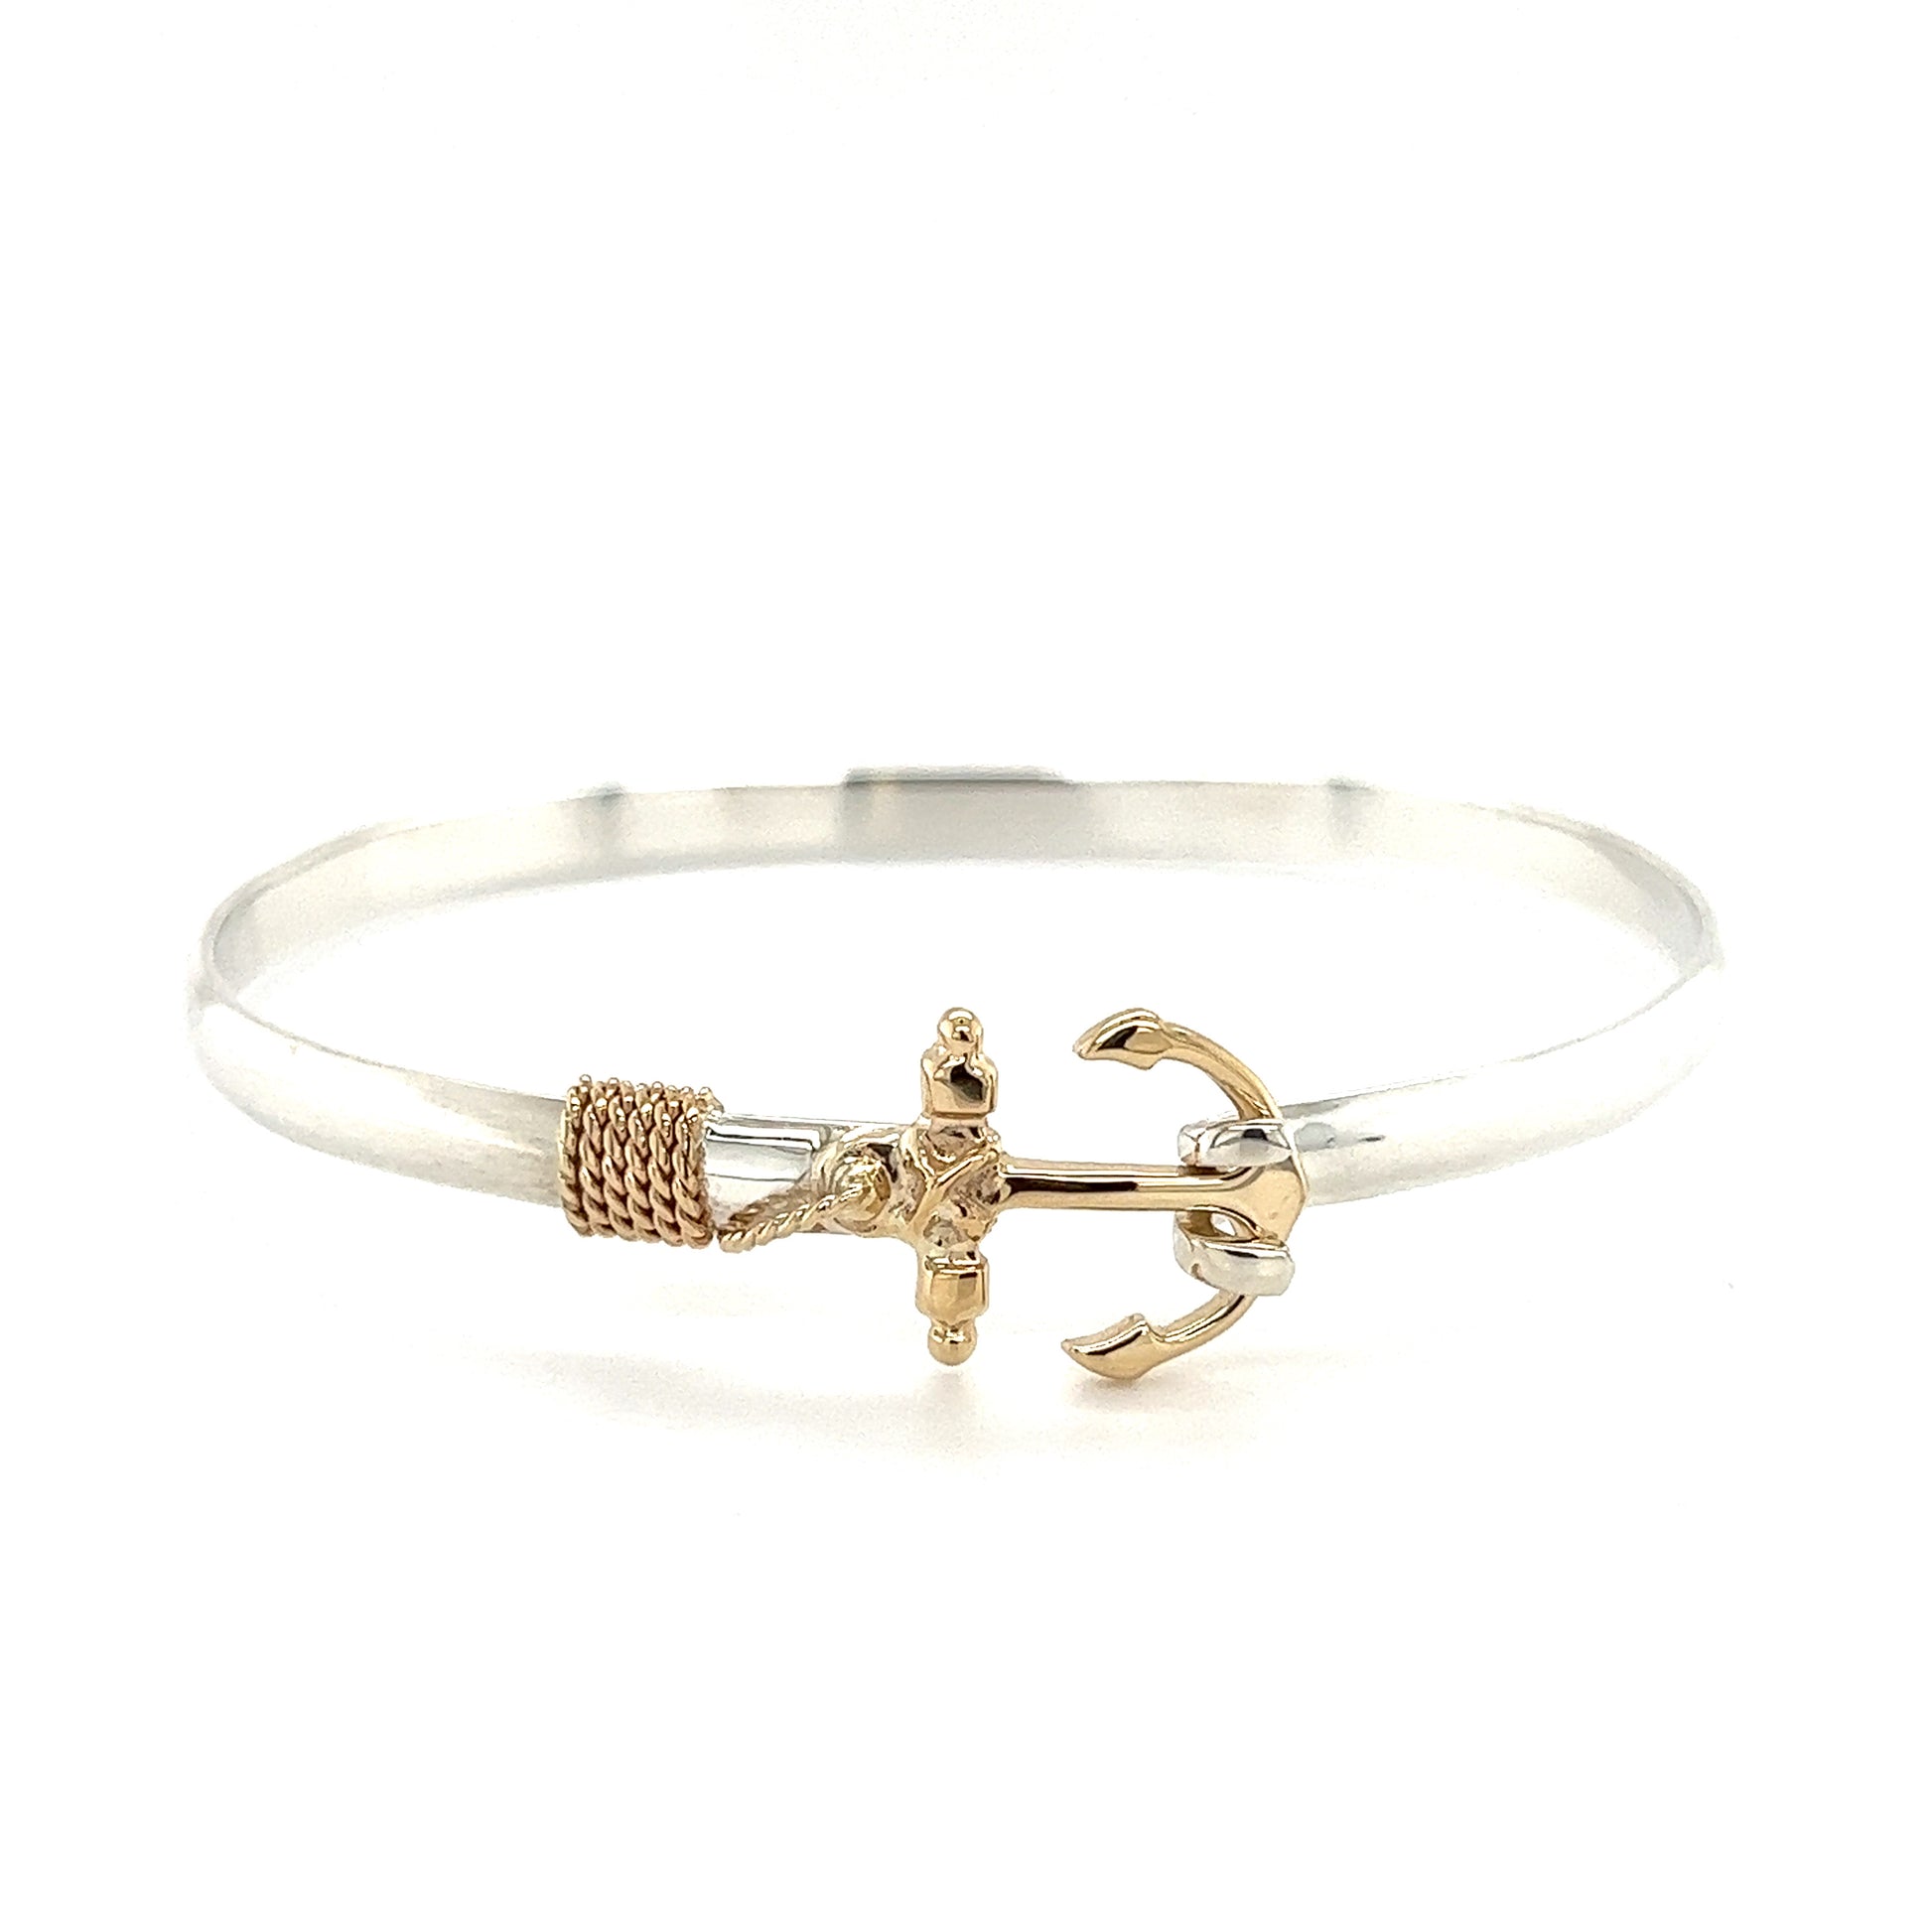 Flat 4mm Bangle Bracelet with 14K Yellow Gold Anchor and Wrap in Sterling Silver Flat Front View